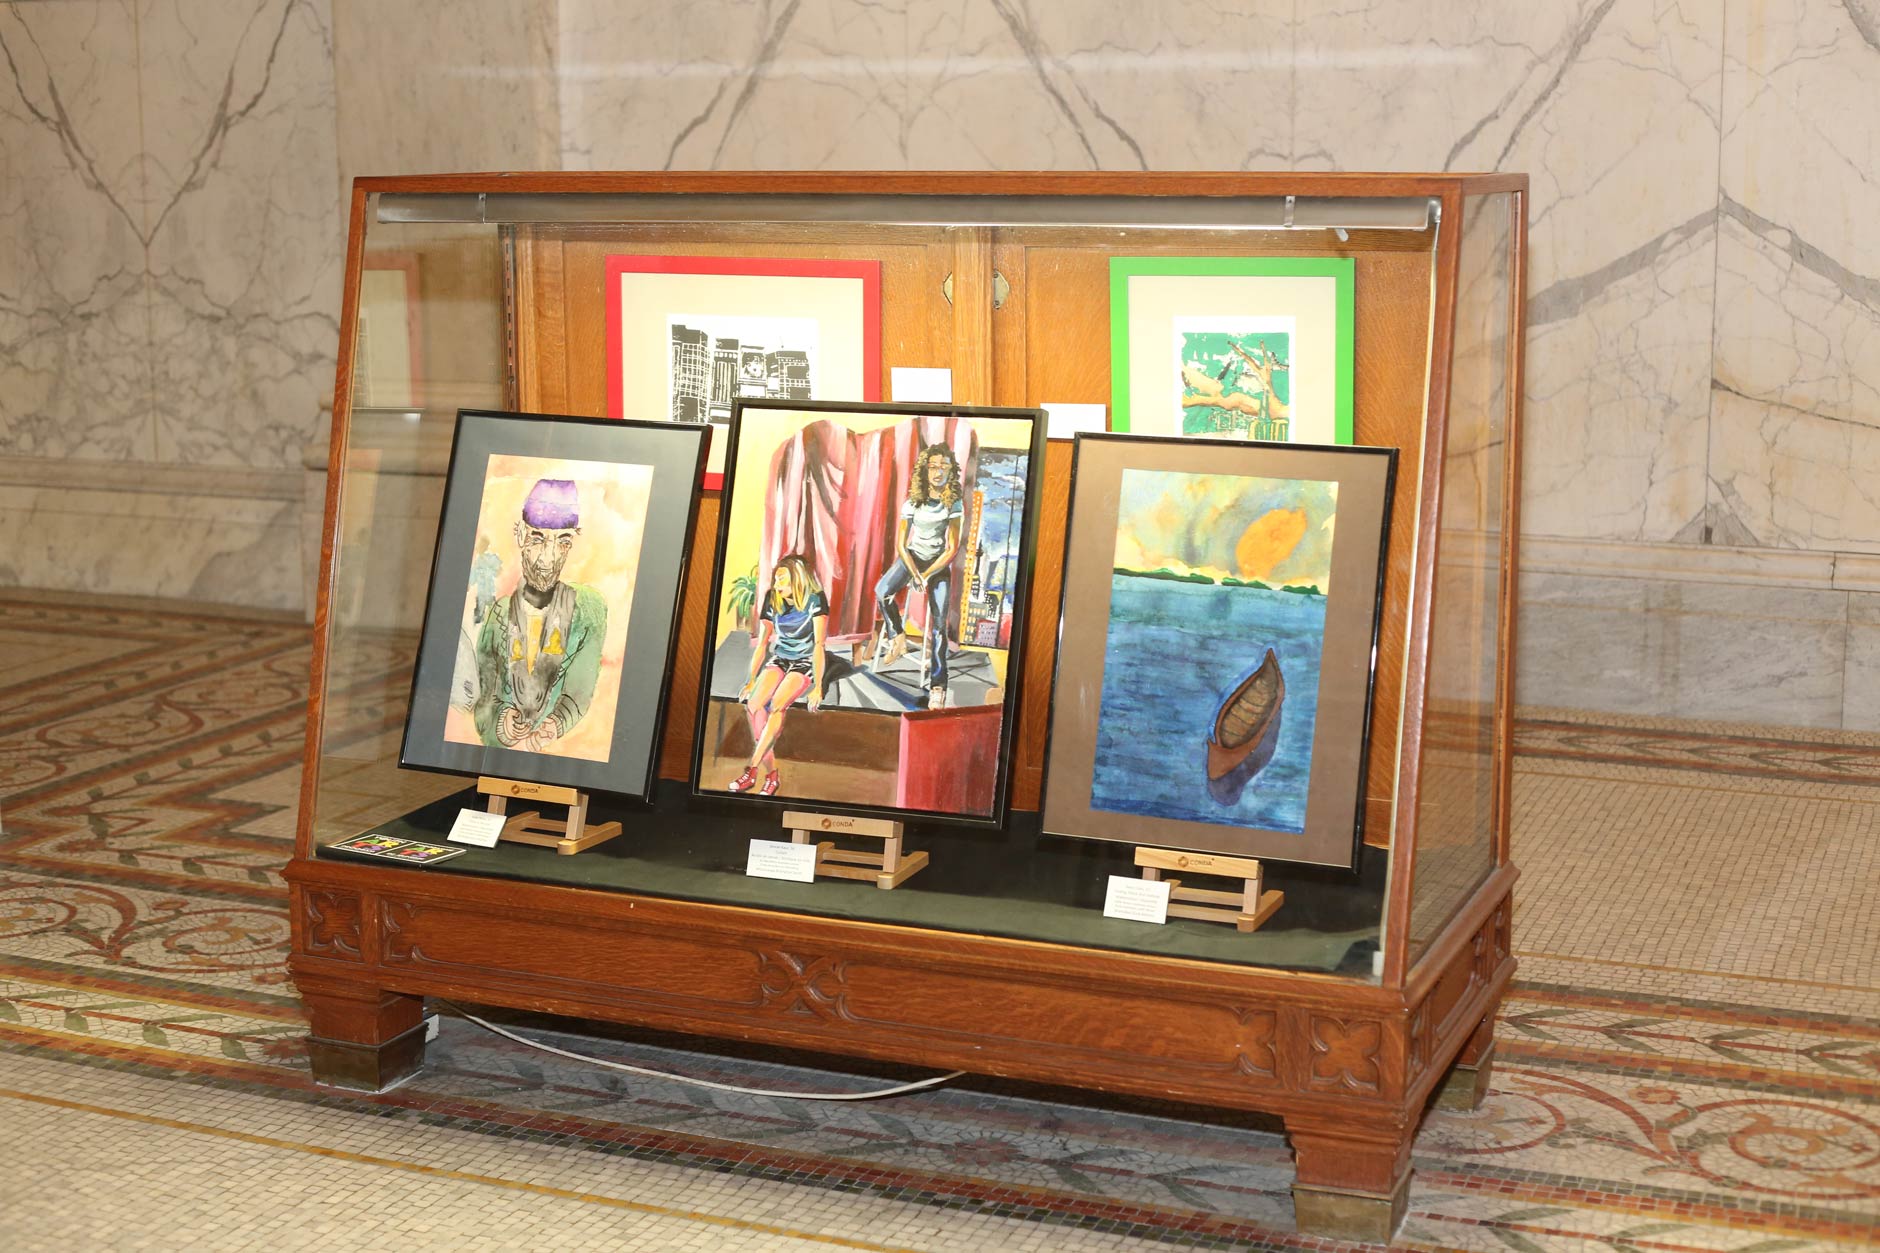 Paintings and drawings by student artists in the 2015 Youth Arts Program.